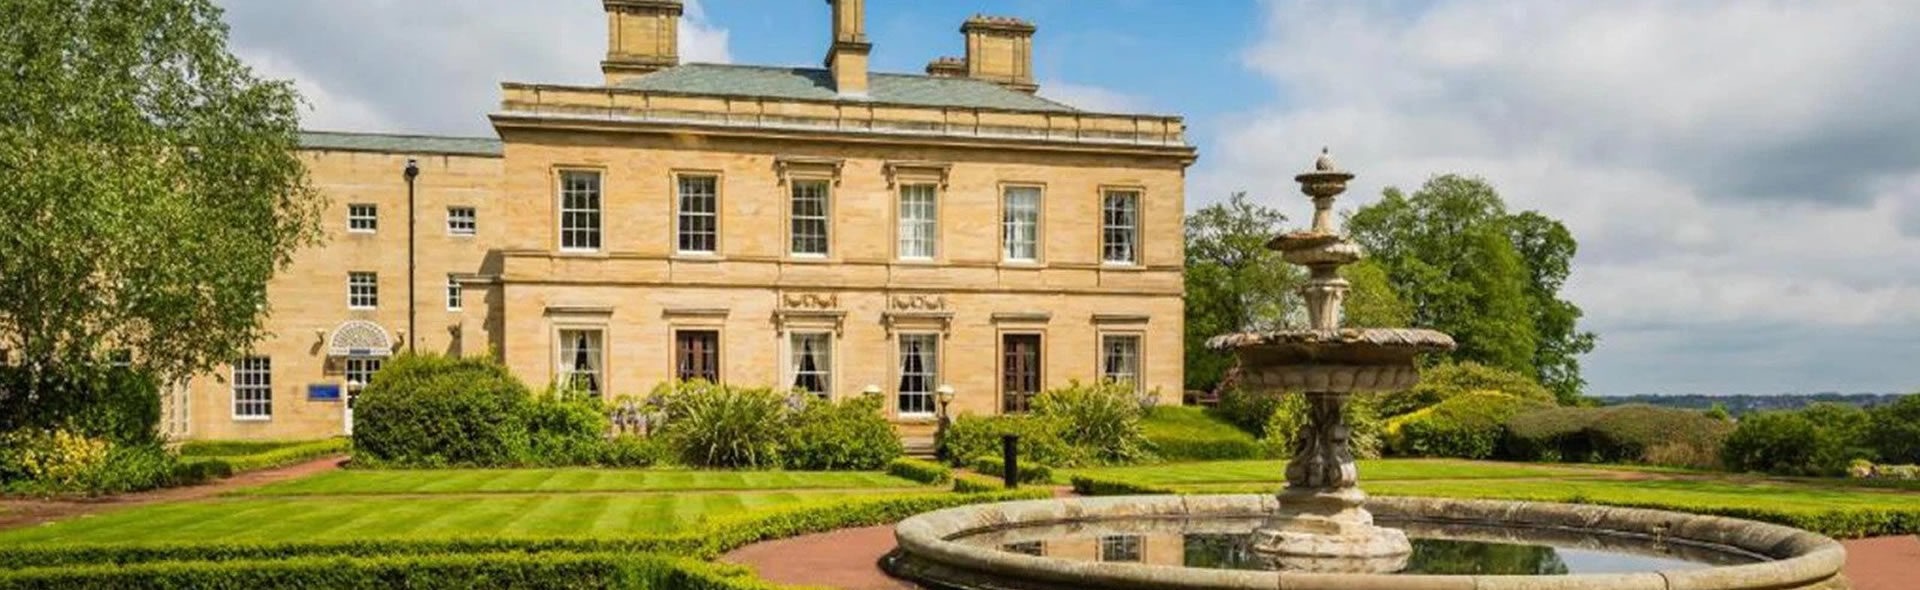 Oulton Hall, West Yorkshire